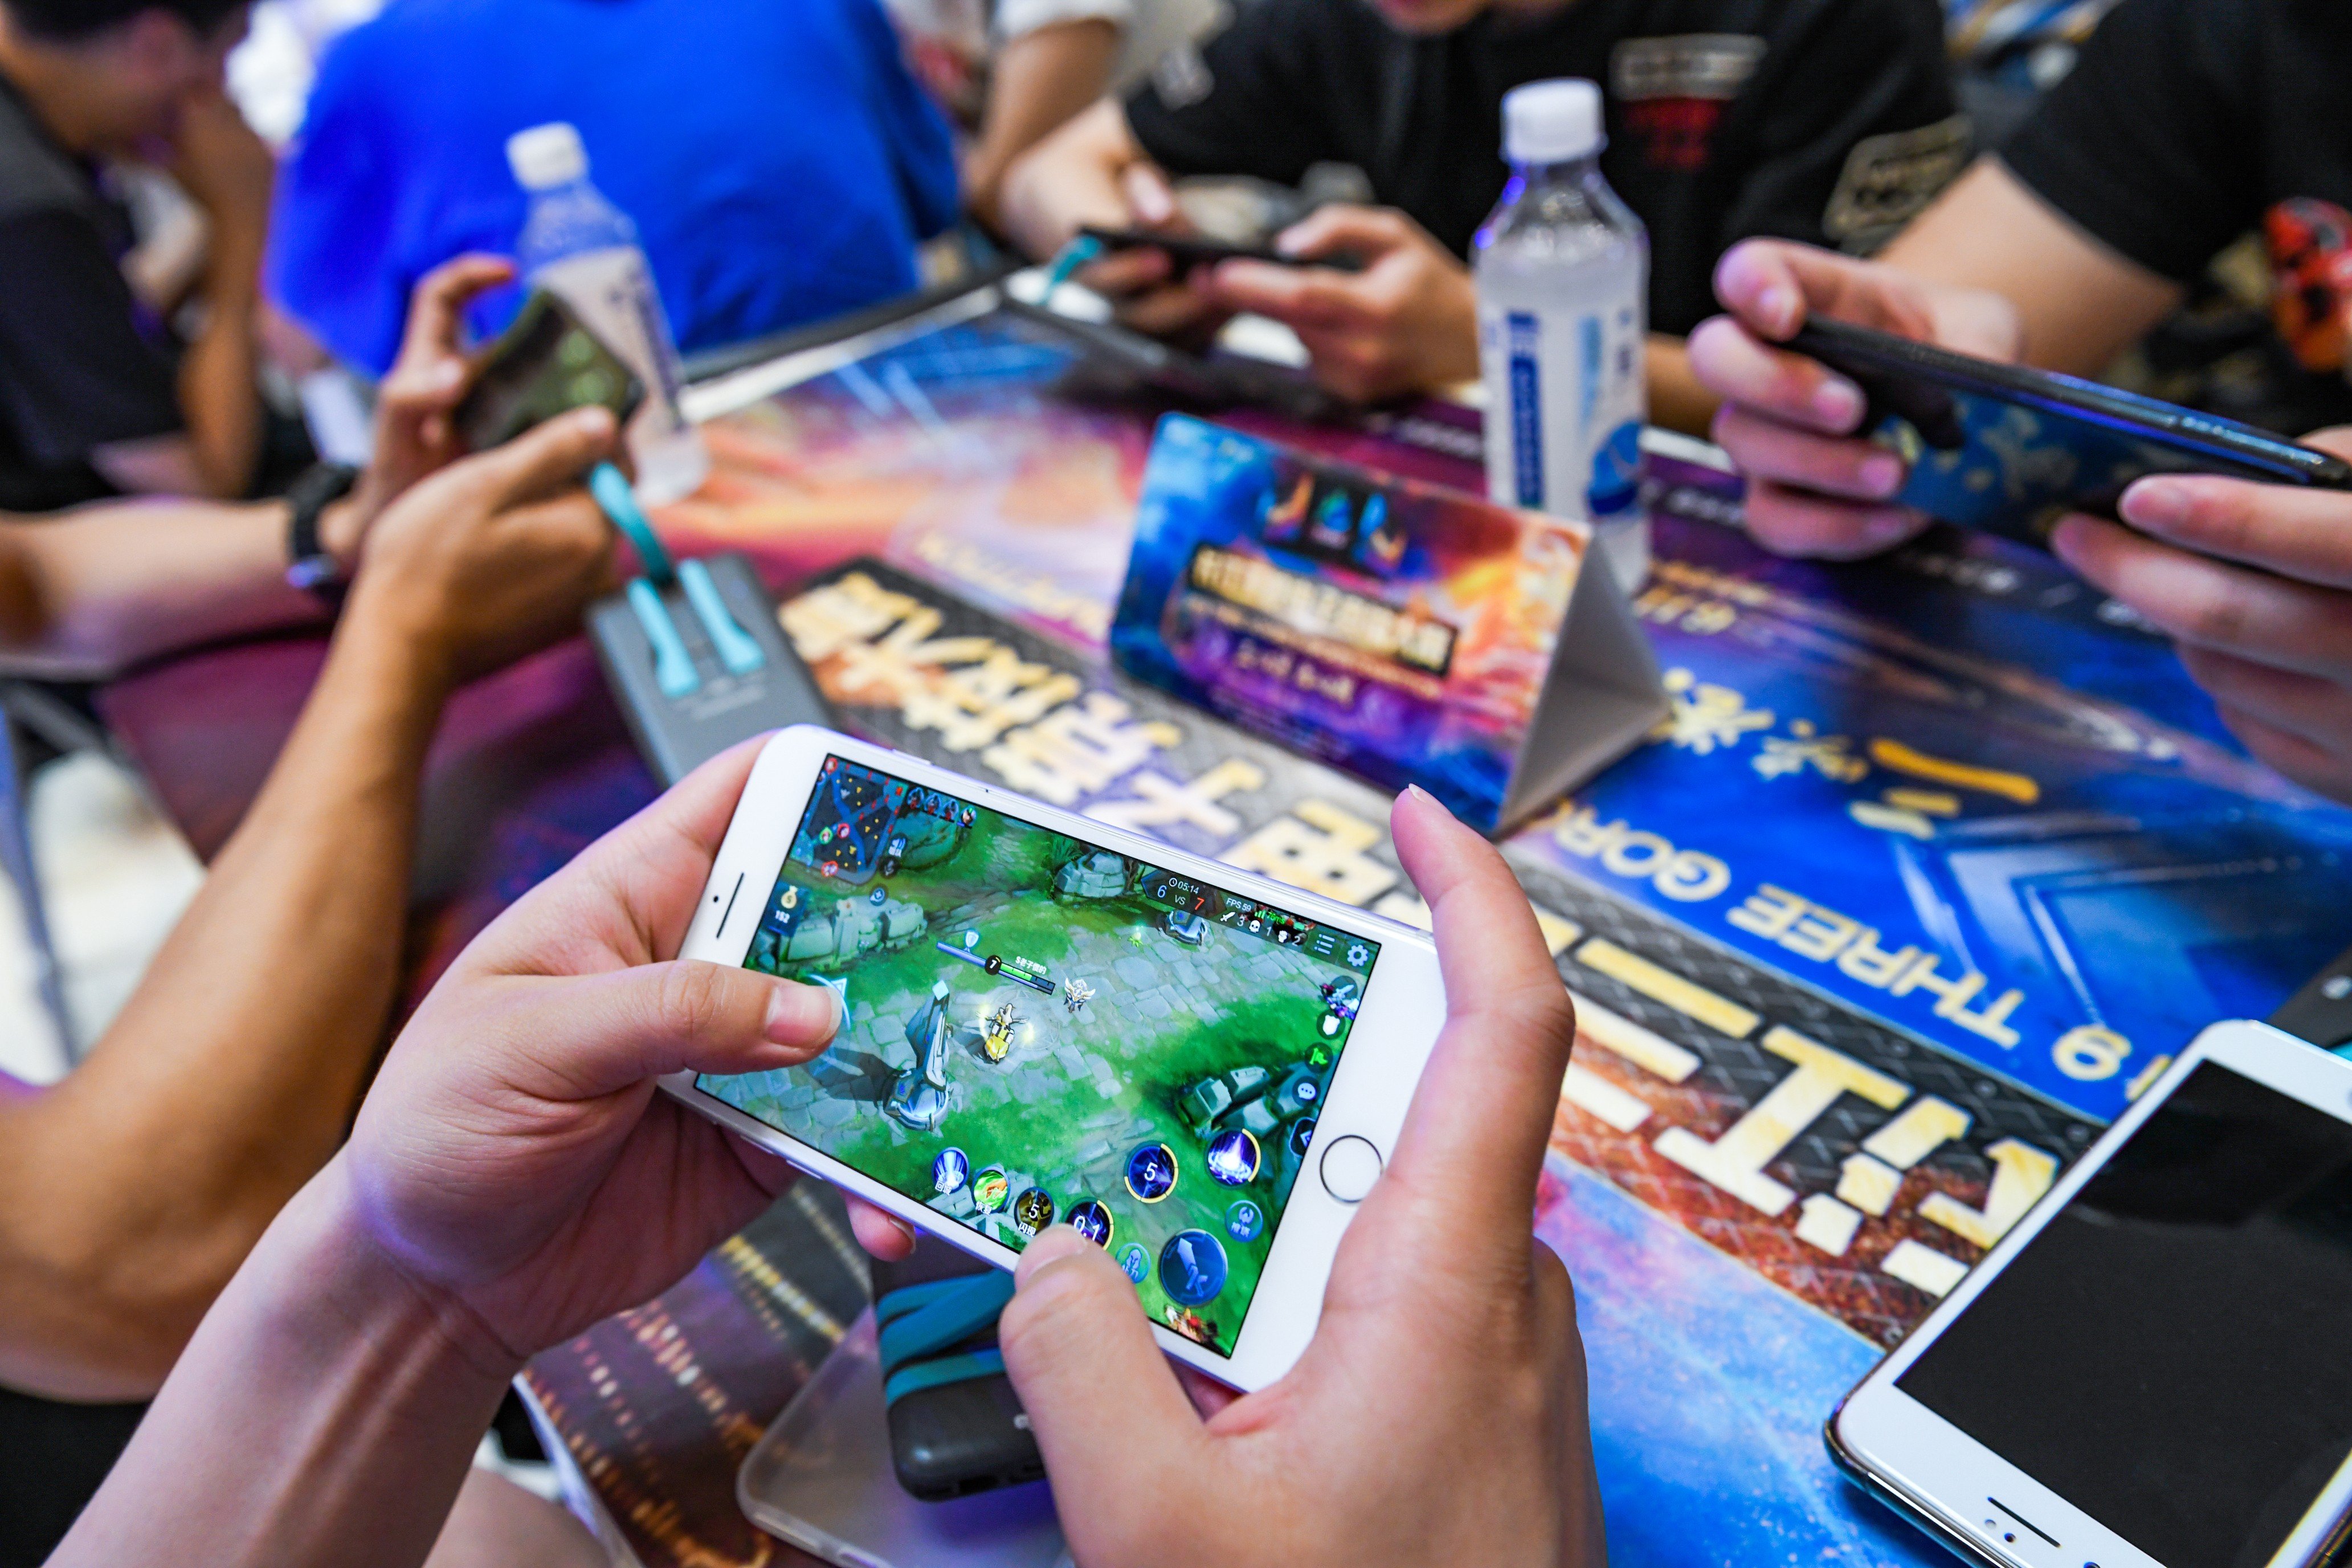 Tencent’s ‘Honour of Kings’ mobile game. A growth catalyst in 2020 will be the launch of its two new games in mobile version, Dungeon & Fighter and League of Legends, according to one analyst. Photo: Imaginechina